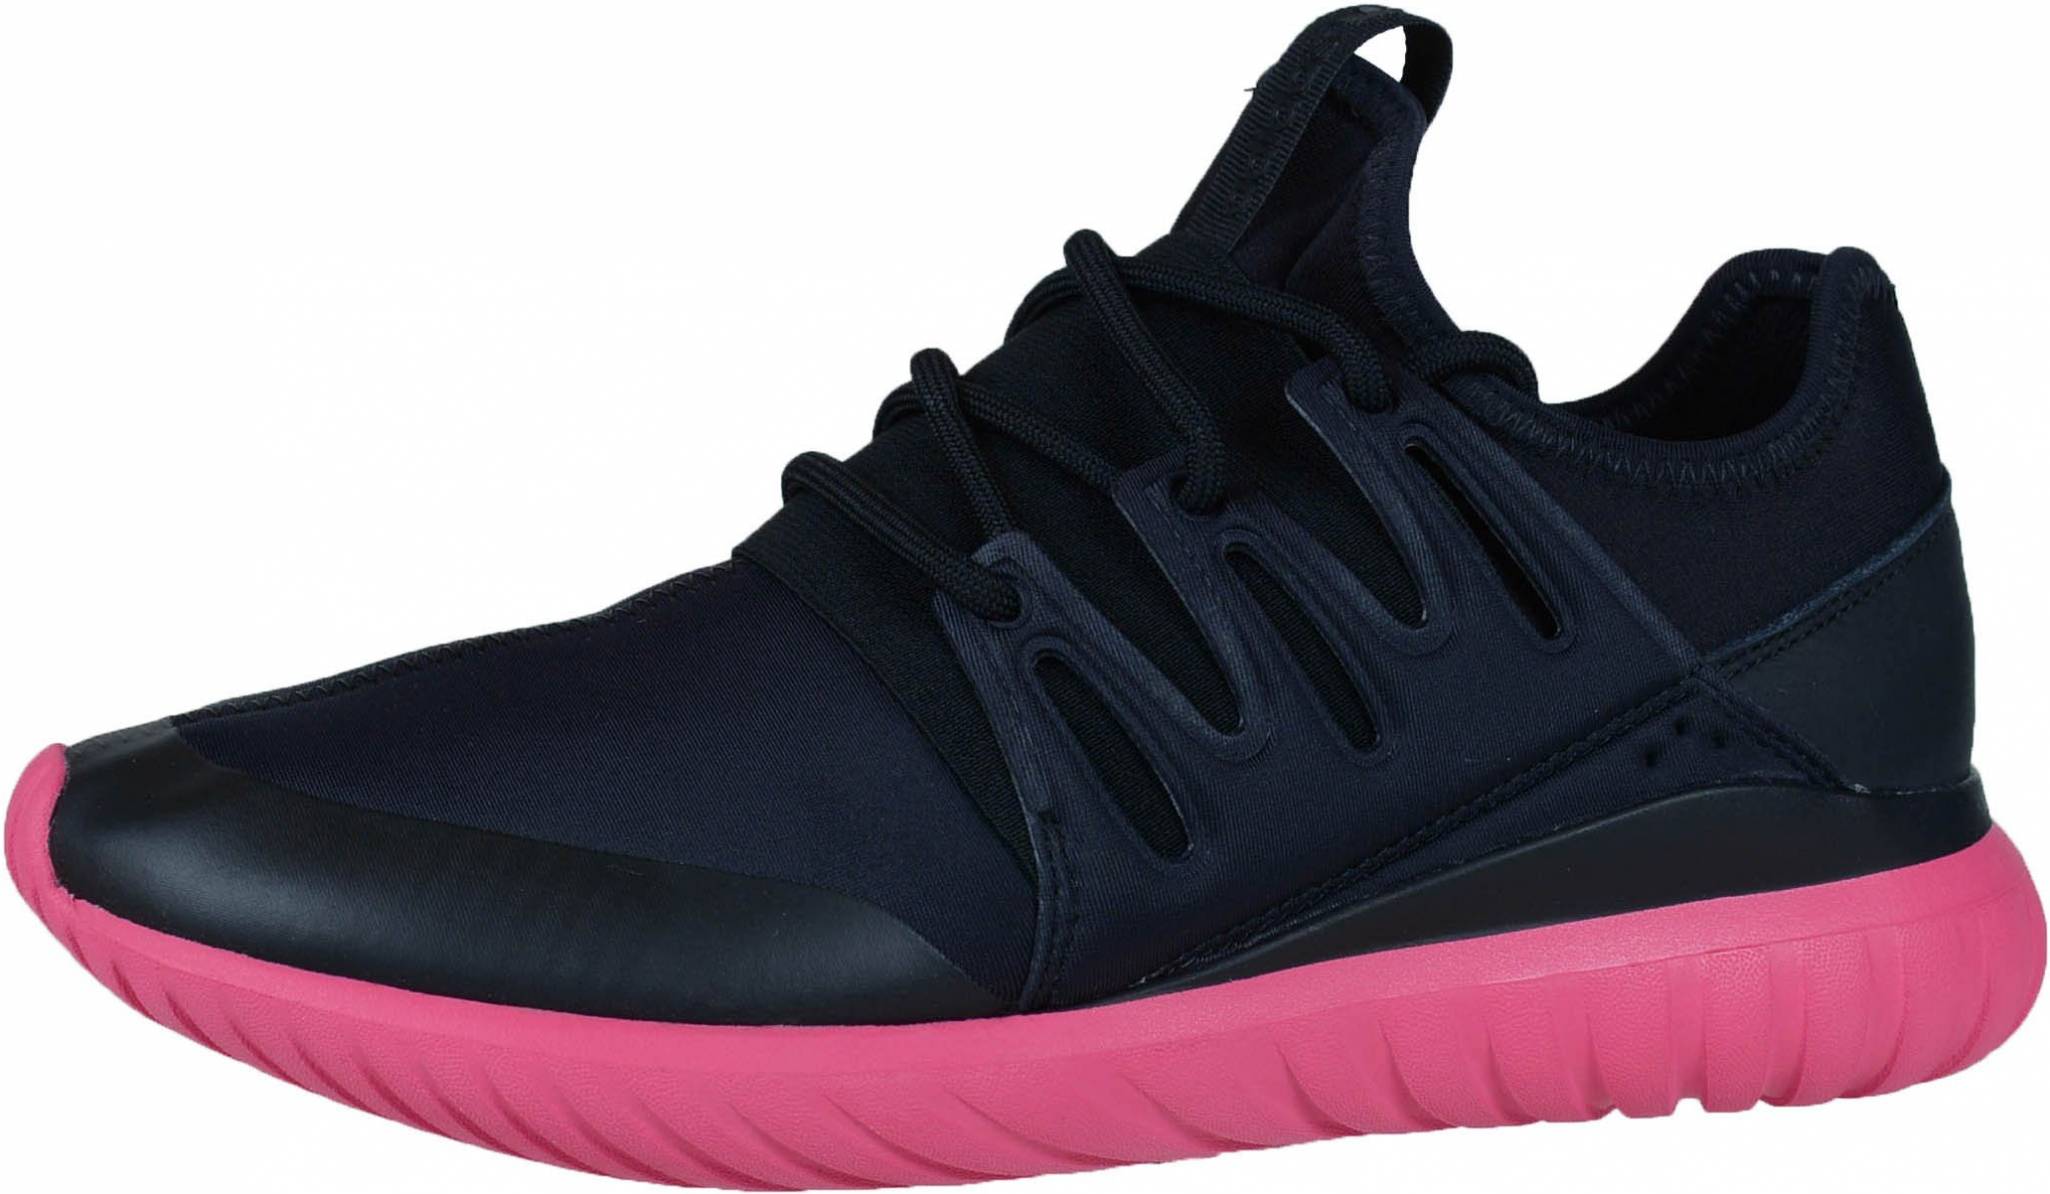 adidas originals tubular radial trainers in red